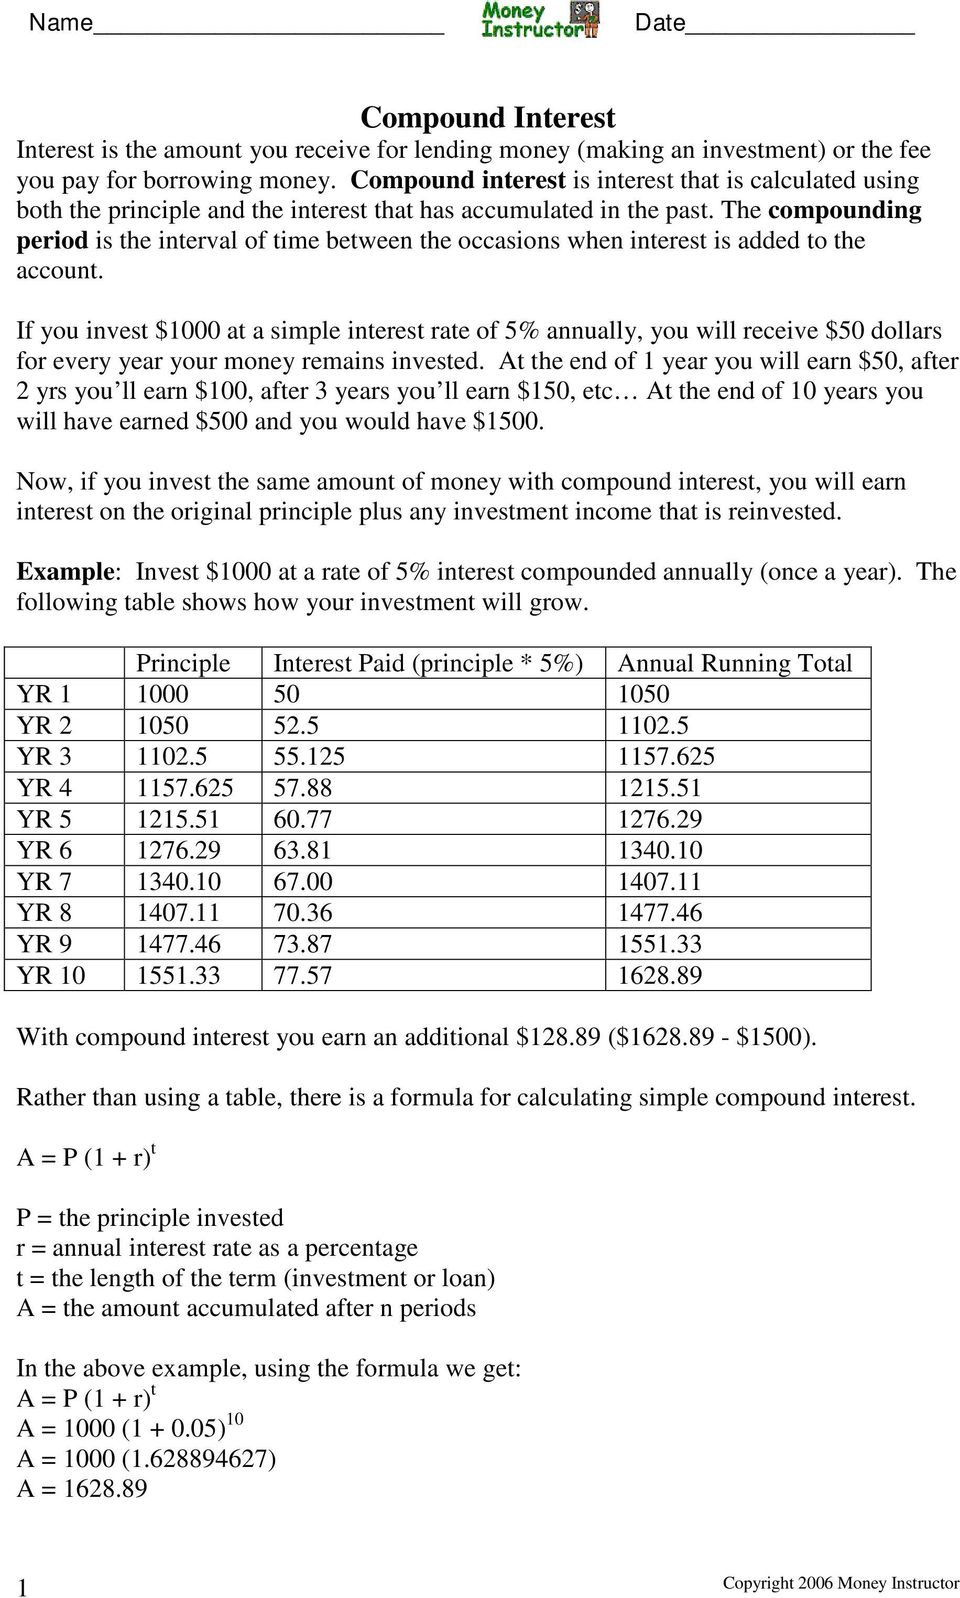 Compound Interest Worksheet Answers Db excel